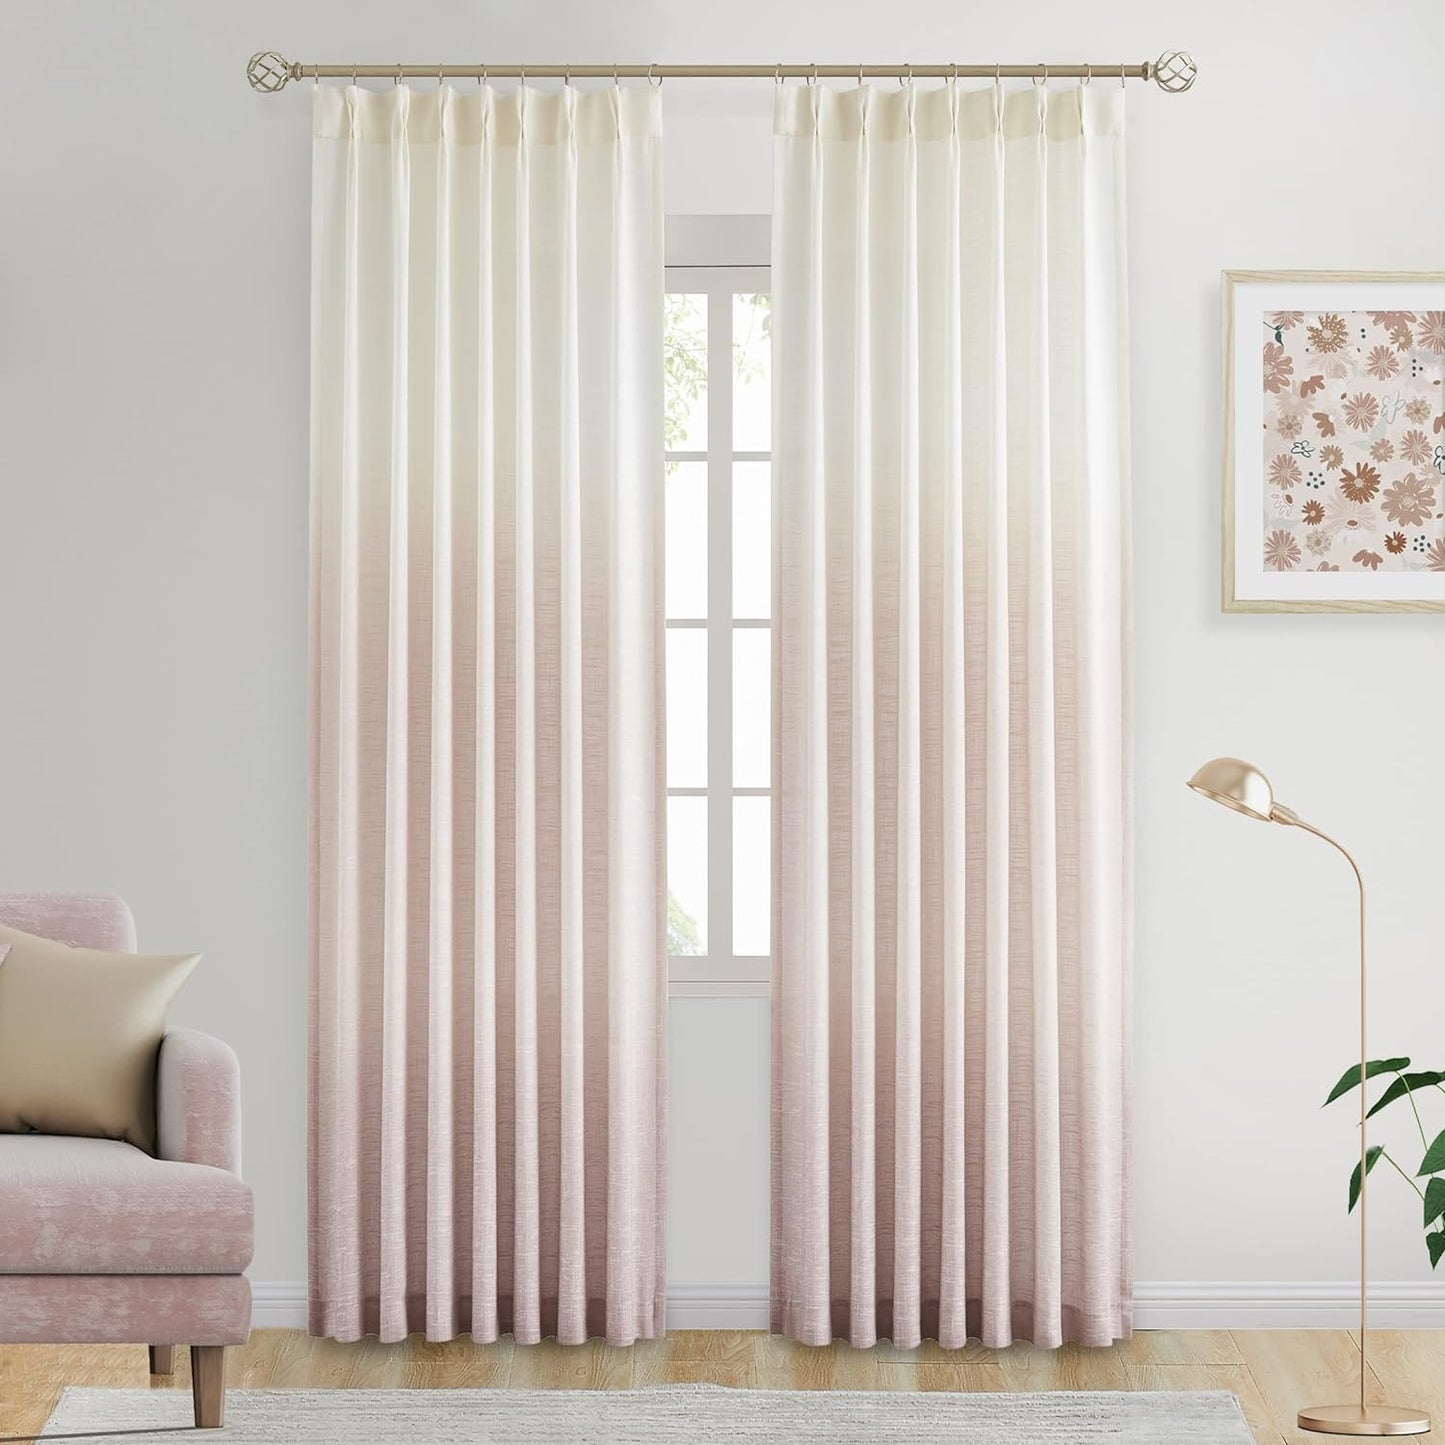 Central Park Ombre Pinch Pleat Curtain Panels Rayon Blend Textured Semi Sheer Window Treatment Drape with Backtab for Living Room Bedroom, Cream White to Indigo Blue, 40" Wx84 L, 2 Panels  Central Park Pink 40"X95"X2 